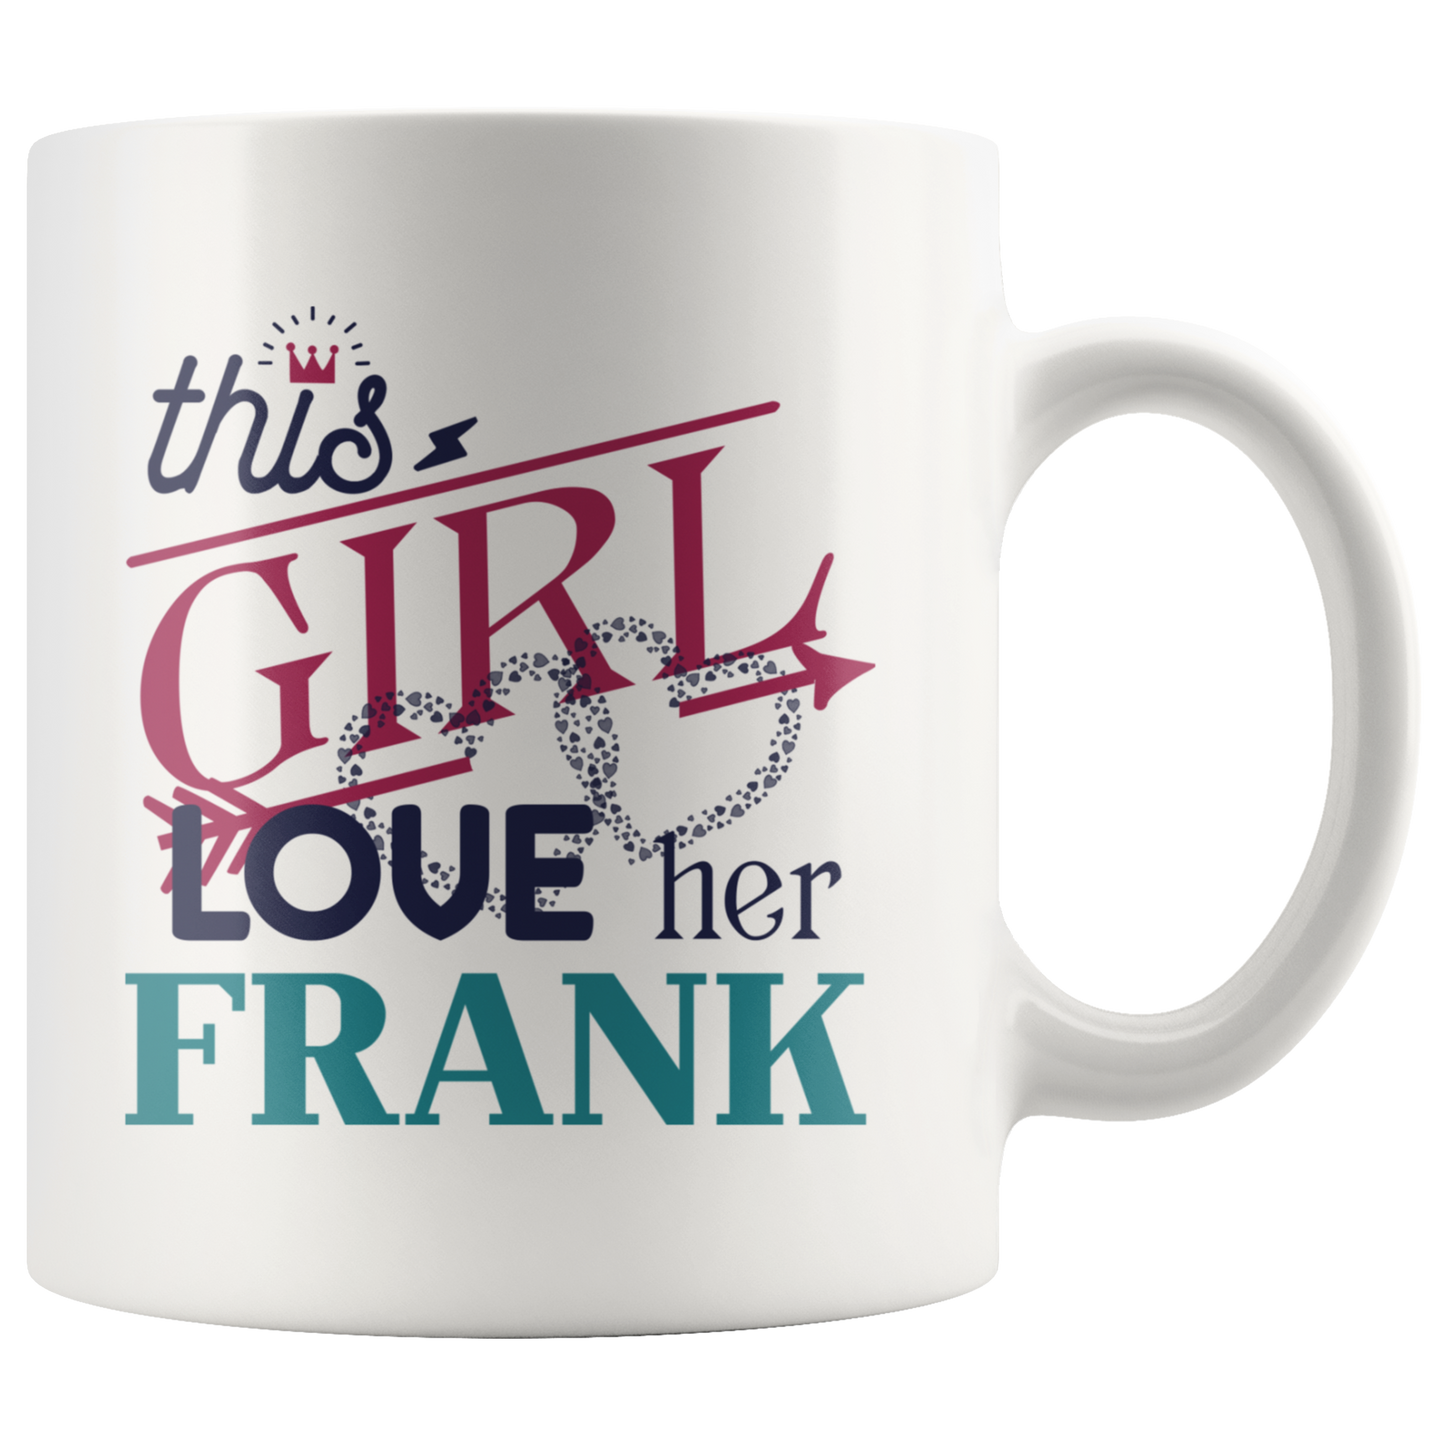 ND20746669-sp-22873 - Funny Mug Gifts For Her, Wife - This Girl Love Her Husband F